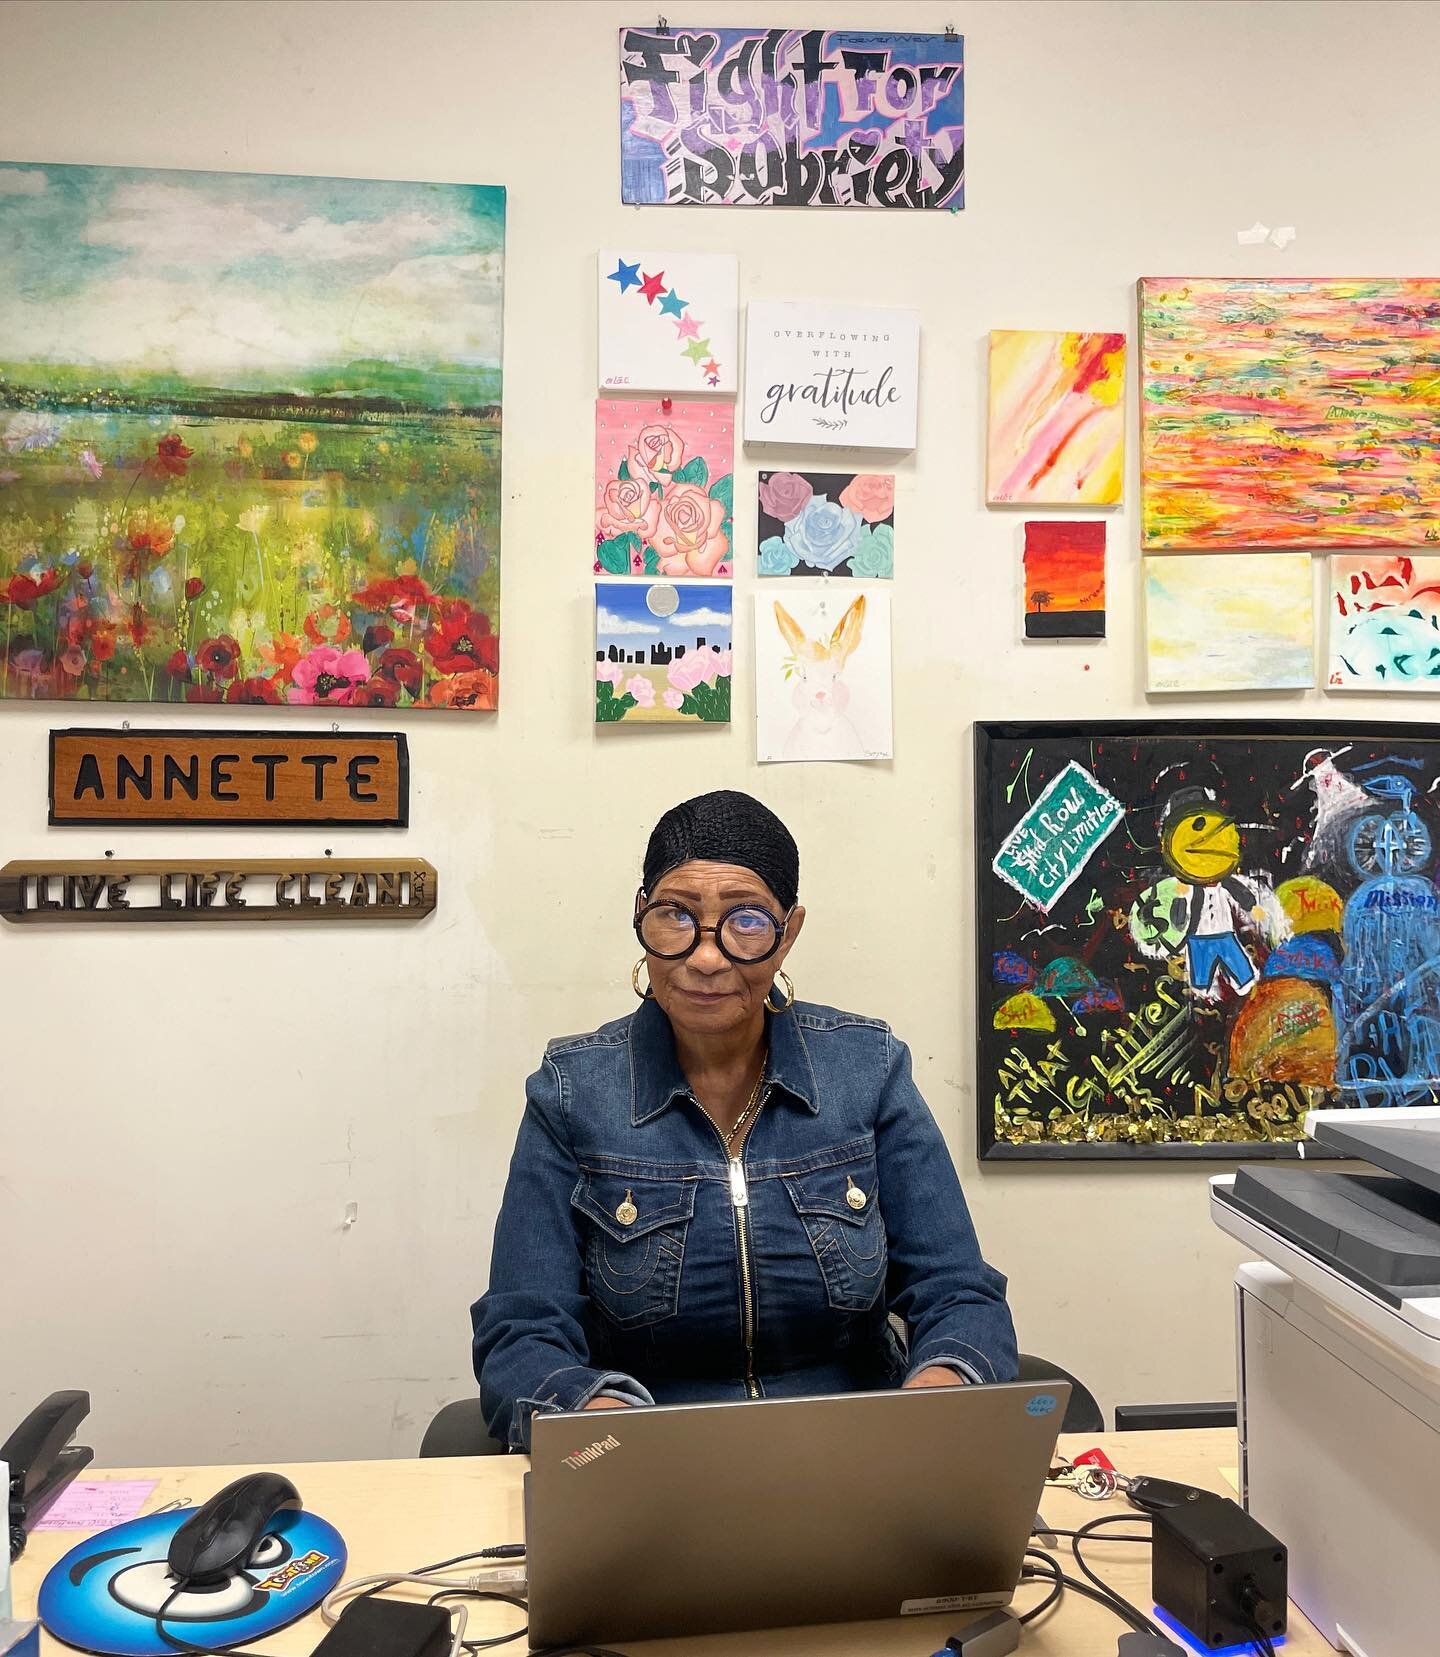 Meet Annette Coleman. She's an incredible human being, and passionate advocate for the vulnerable population of homeless individuals in Los Angeles. 

As a coordinator for @didi_hirsch's Project 50, she empathetically provides substance abuse counsel